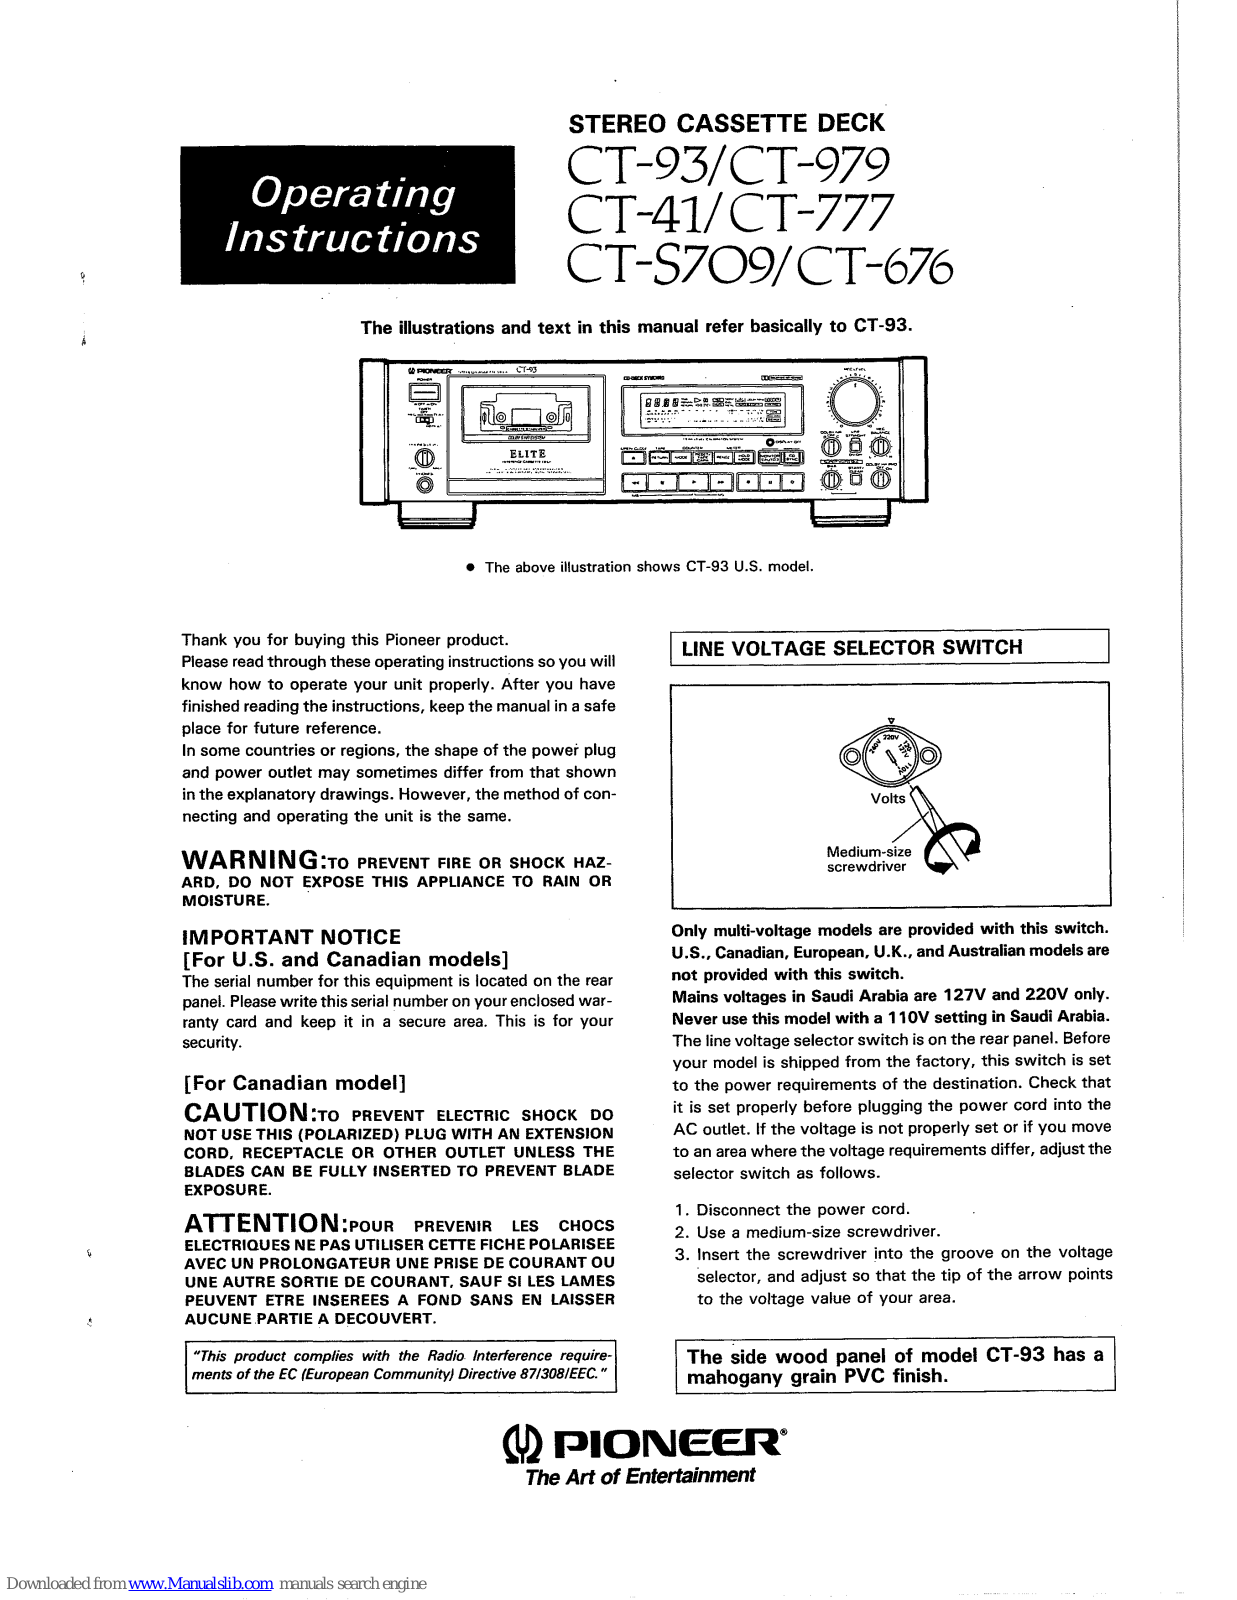 Pioneer CT-93, CT-41, CT-979, CT-777, CT-S709 Operating Instructions Manual